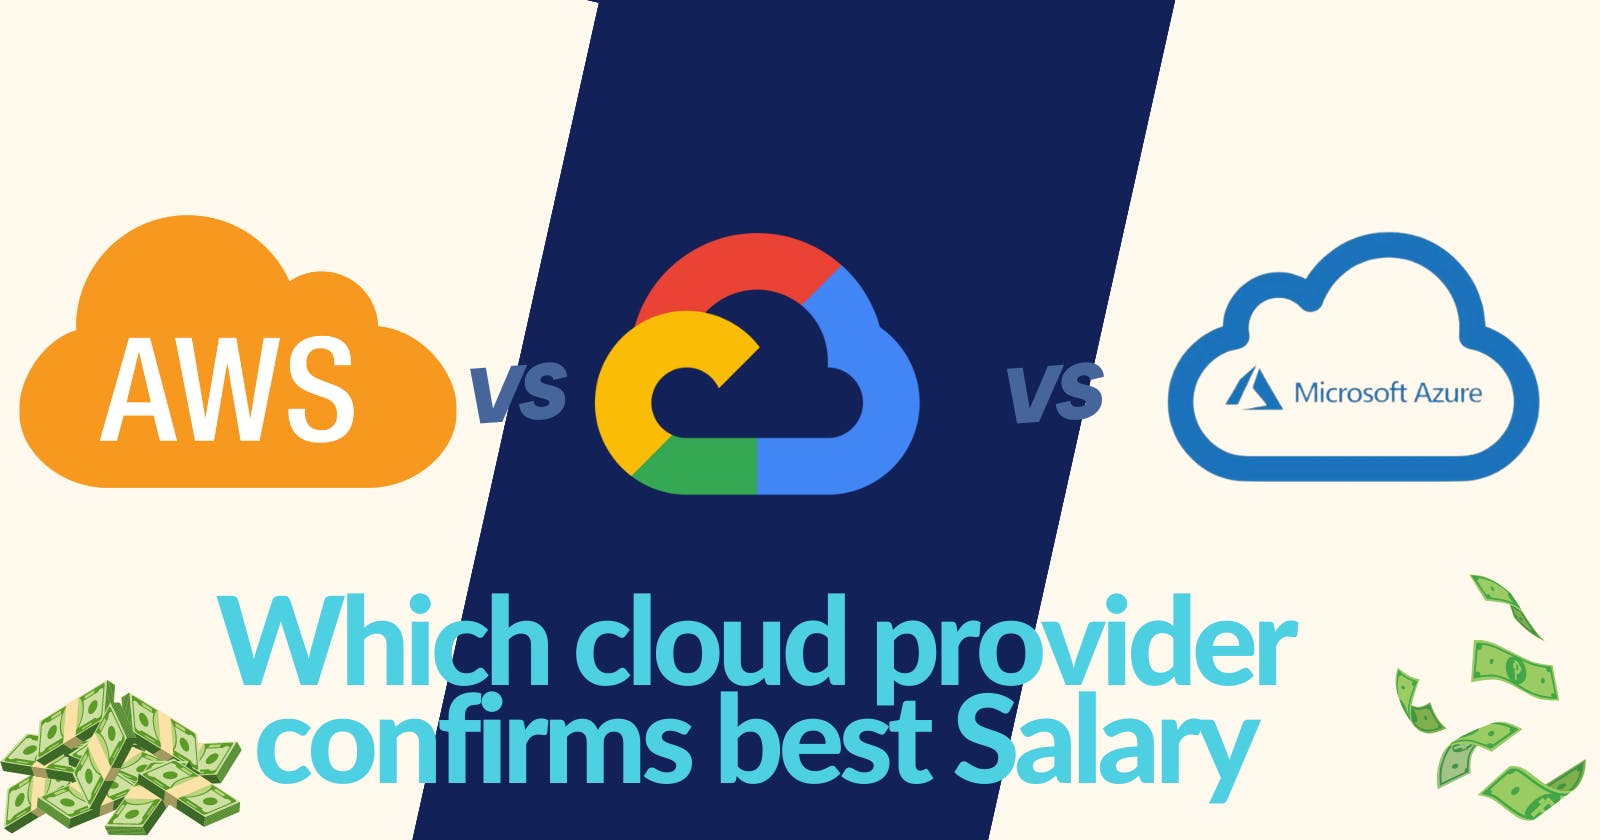 Comparing Jobs and Salary: AWS, Azure, and GCP